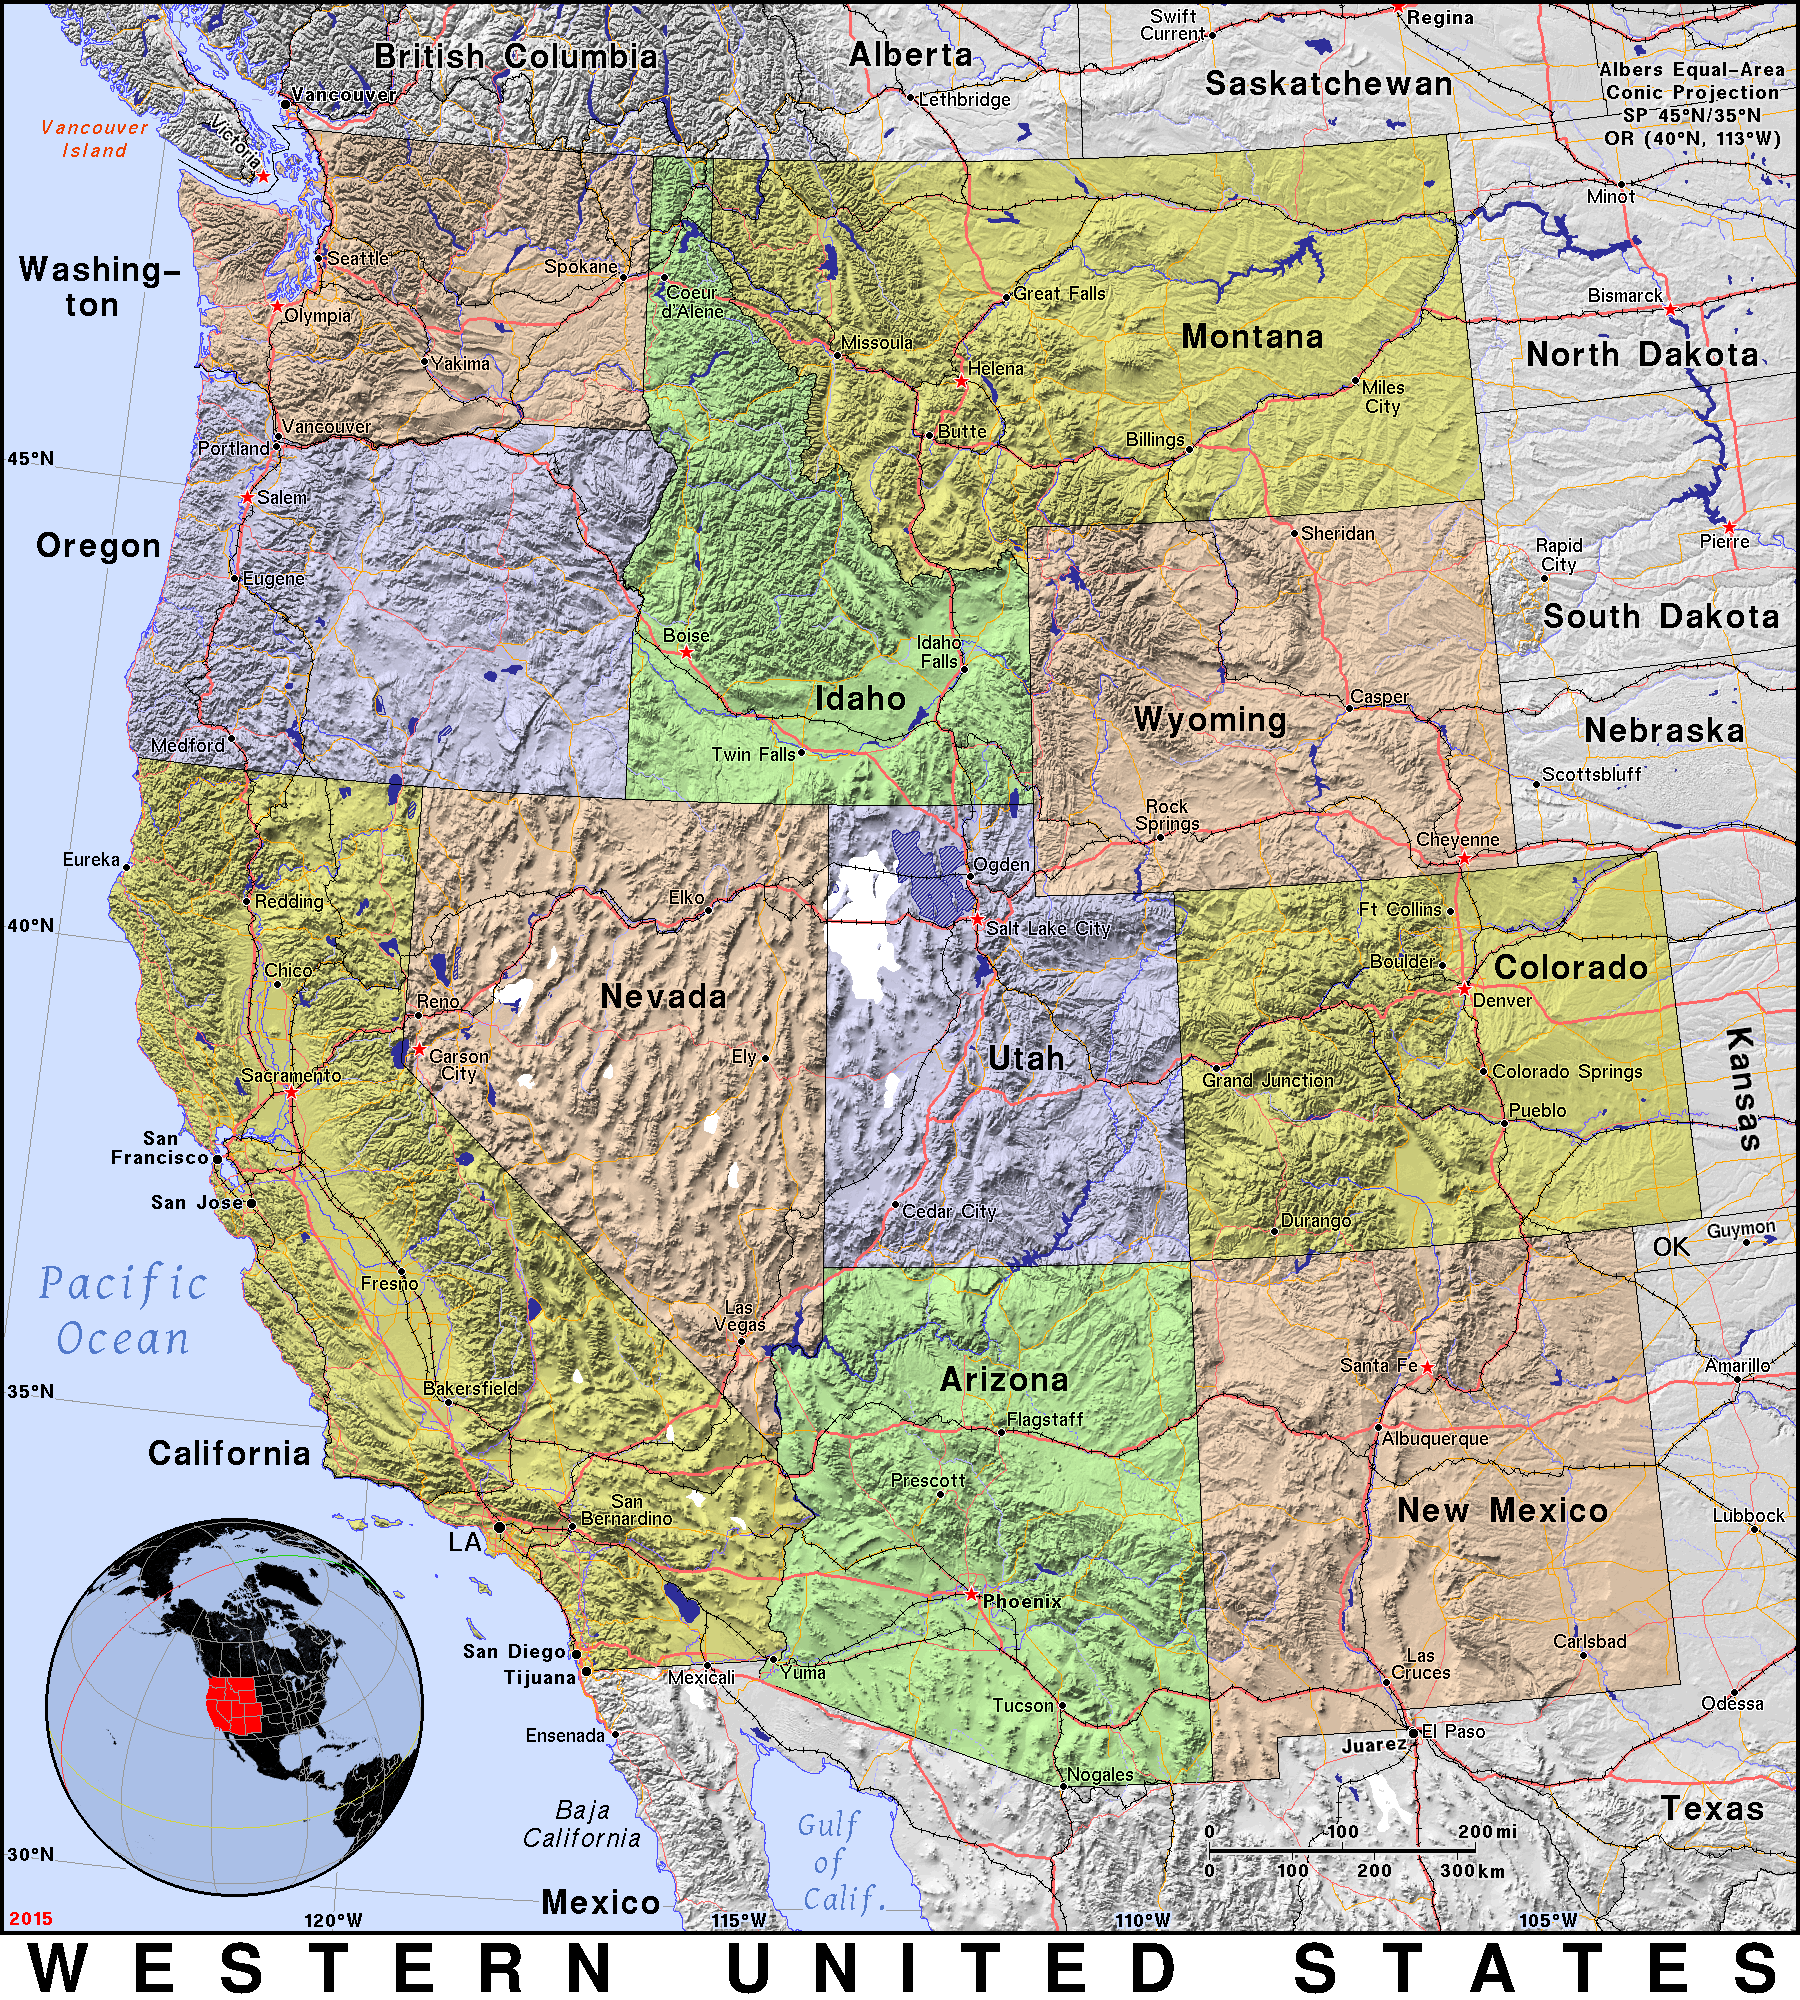 Western United States Public Domain Maps By Pat The Free Open